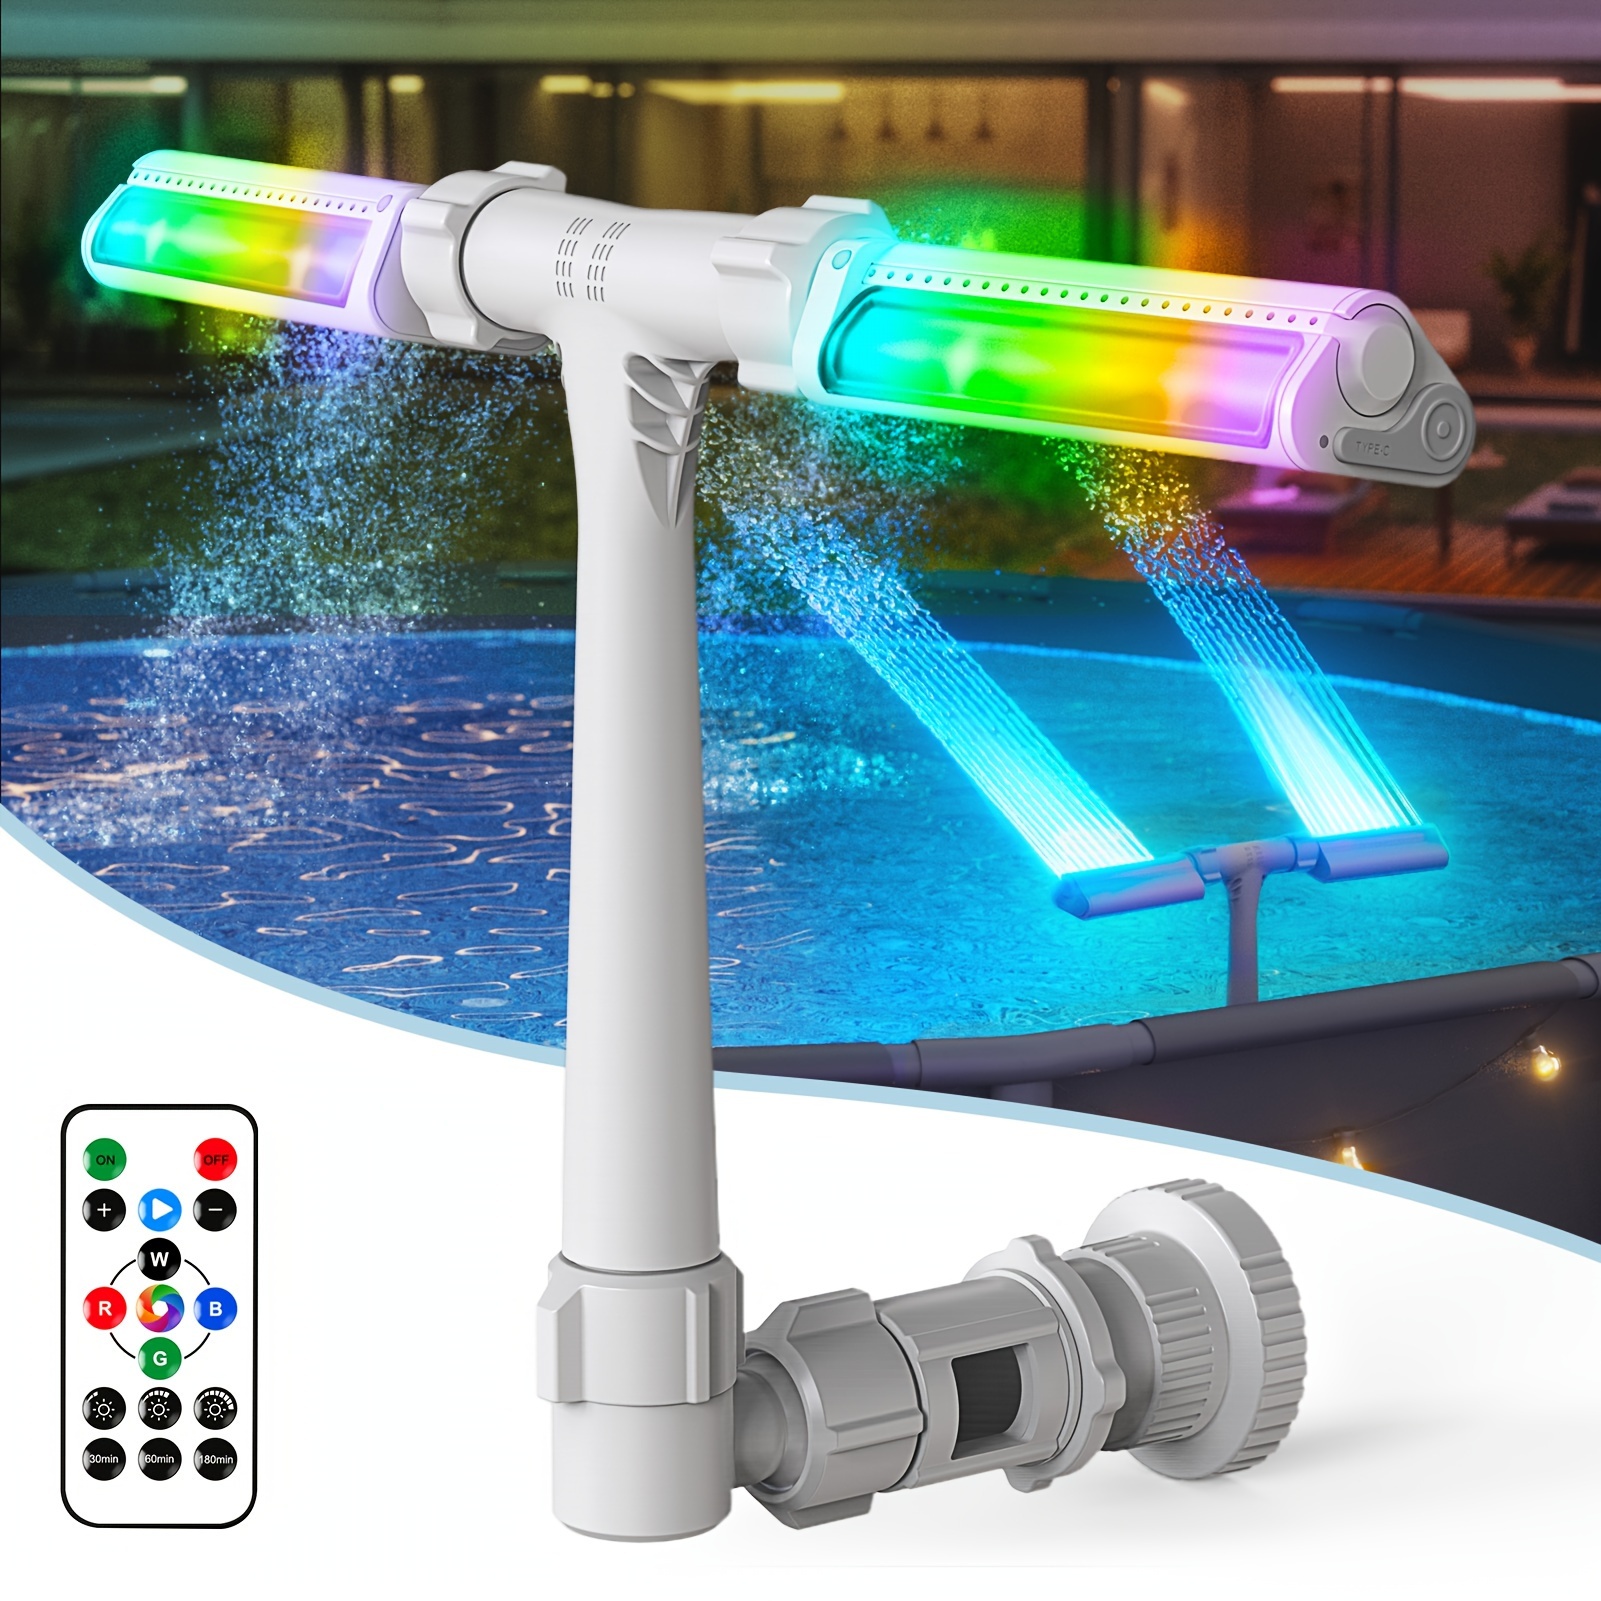 

Set Pool Fountain With 7-color Led Lights, Above/inground Pool Fountain Lights With Remote Control, Adjustable Pool Sprinkler Fountain With Dual Spray Heads, Above Ground Pool Cooling System